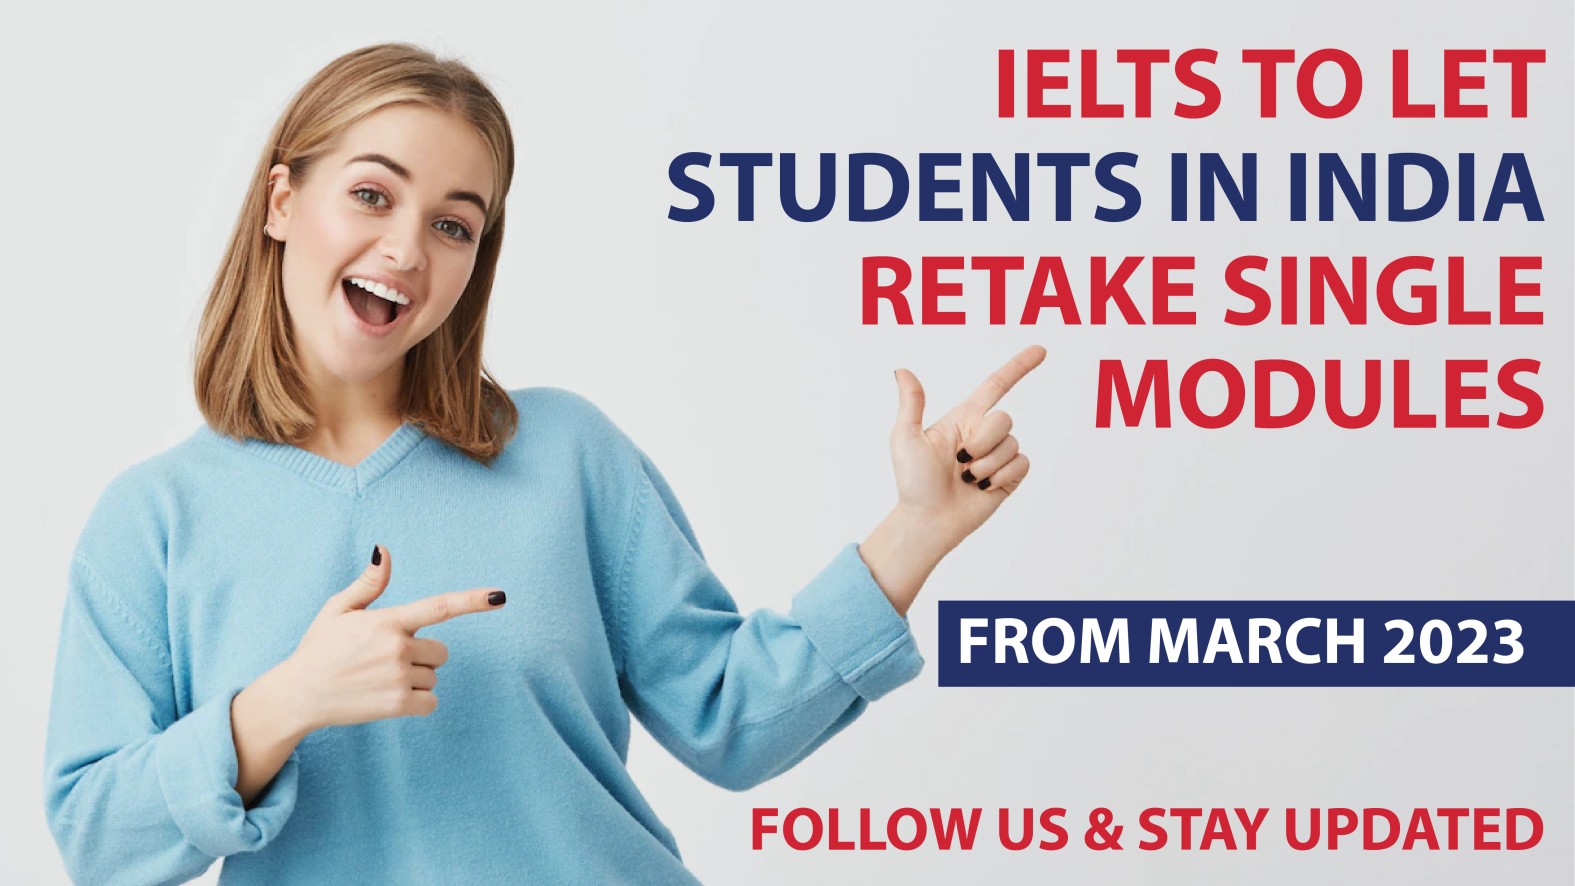 IELTS announced “One Skill Retake” from March 2023 in India